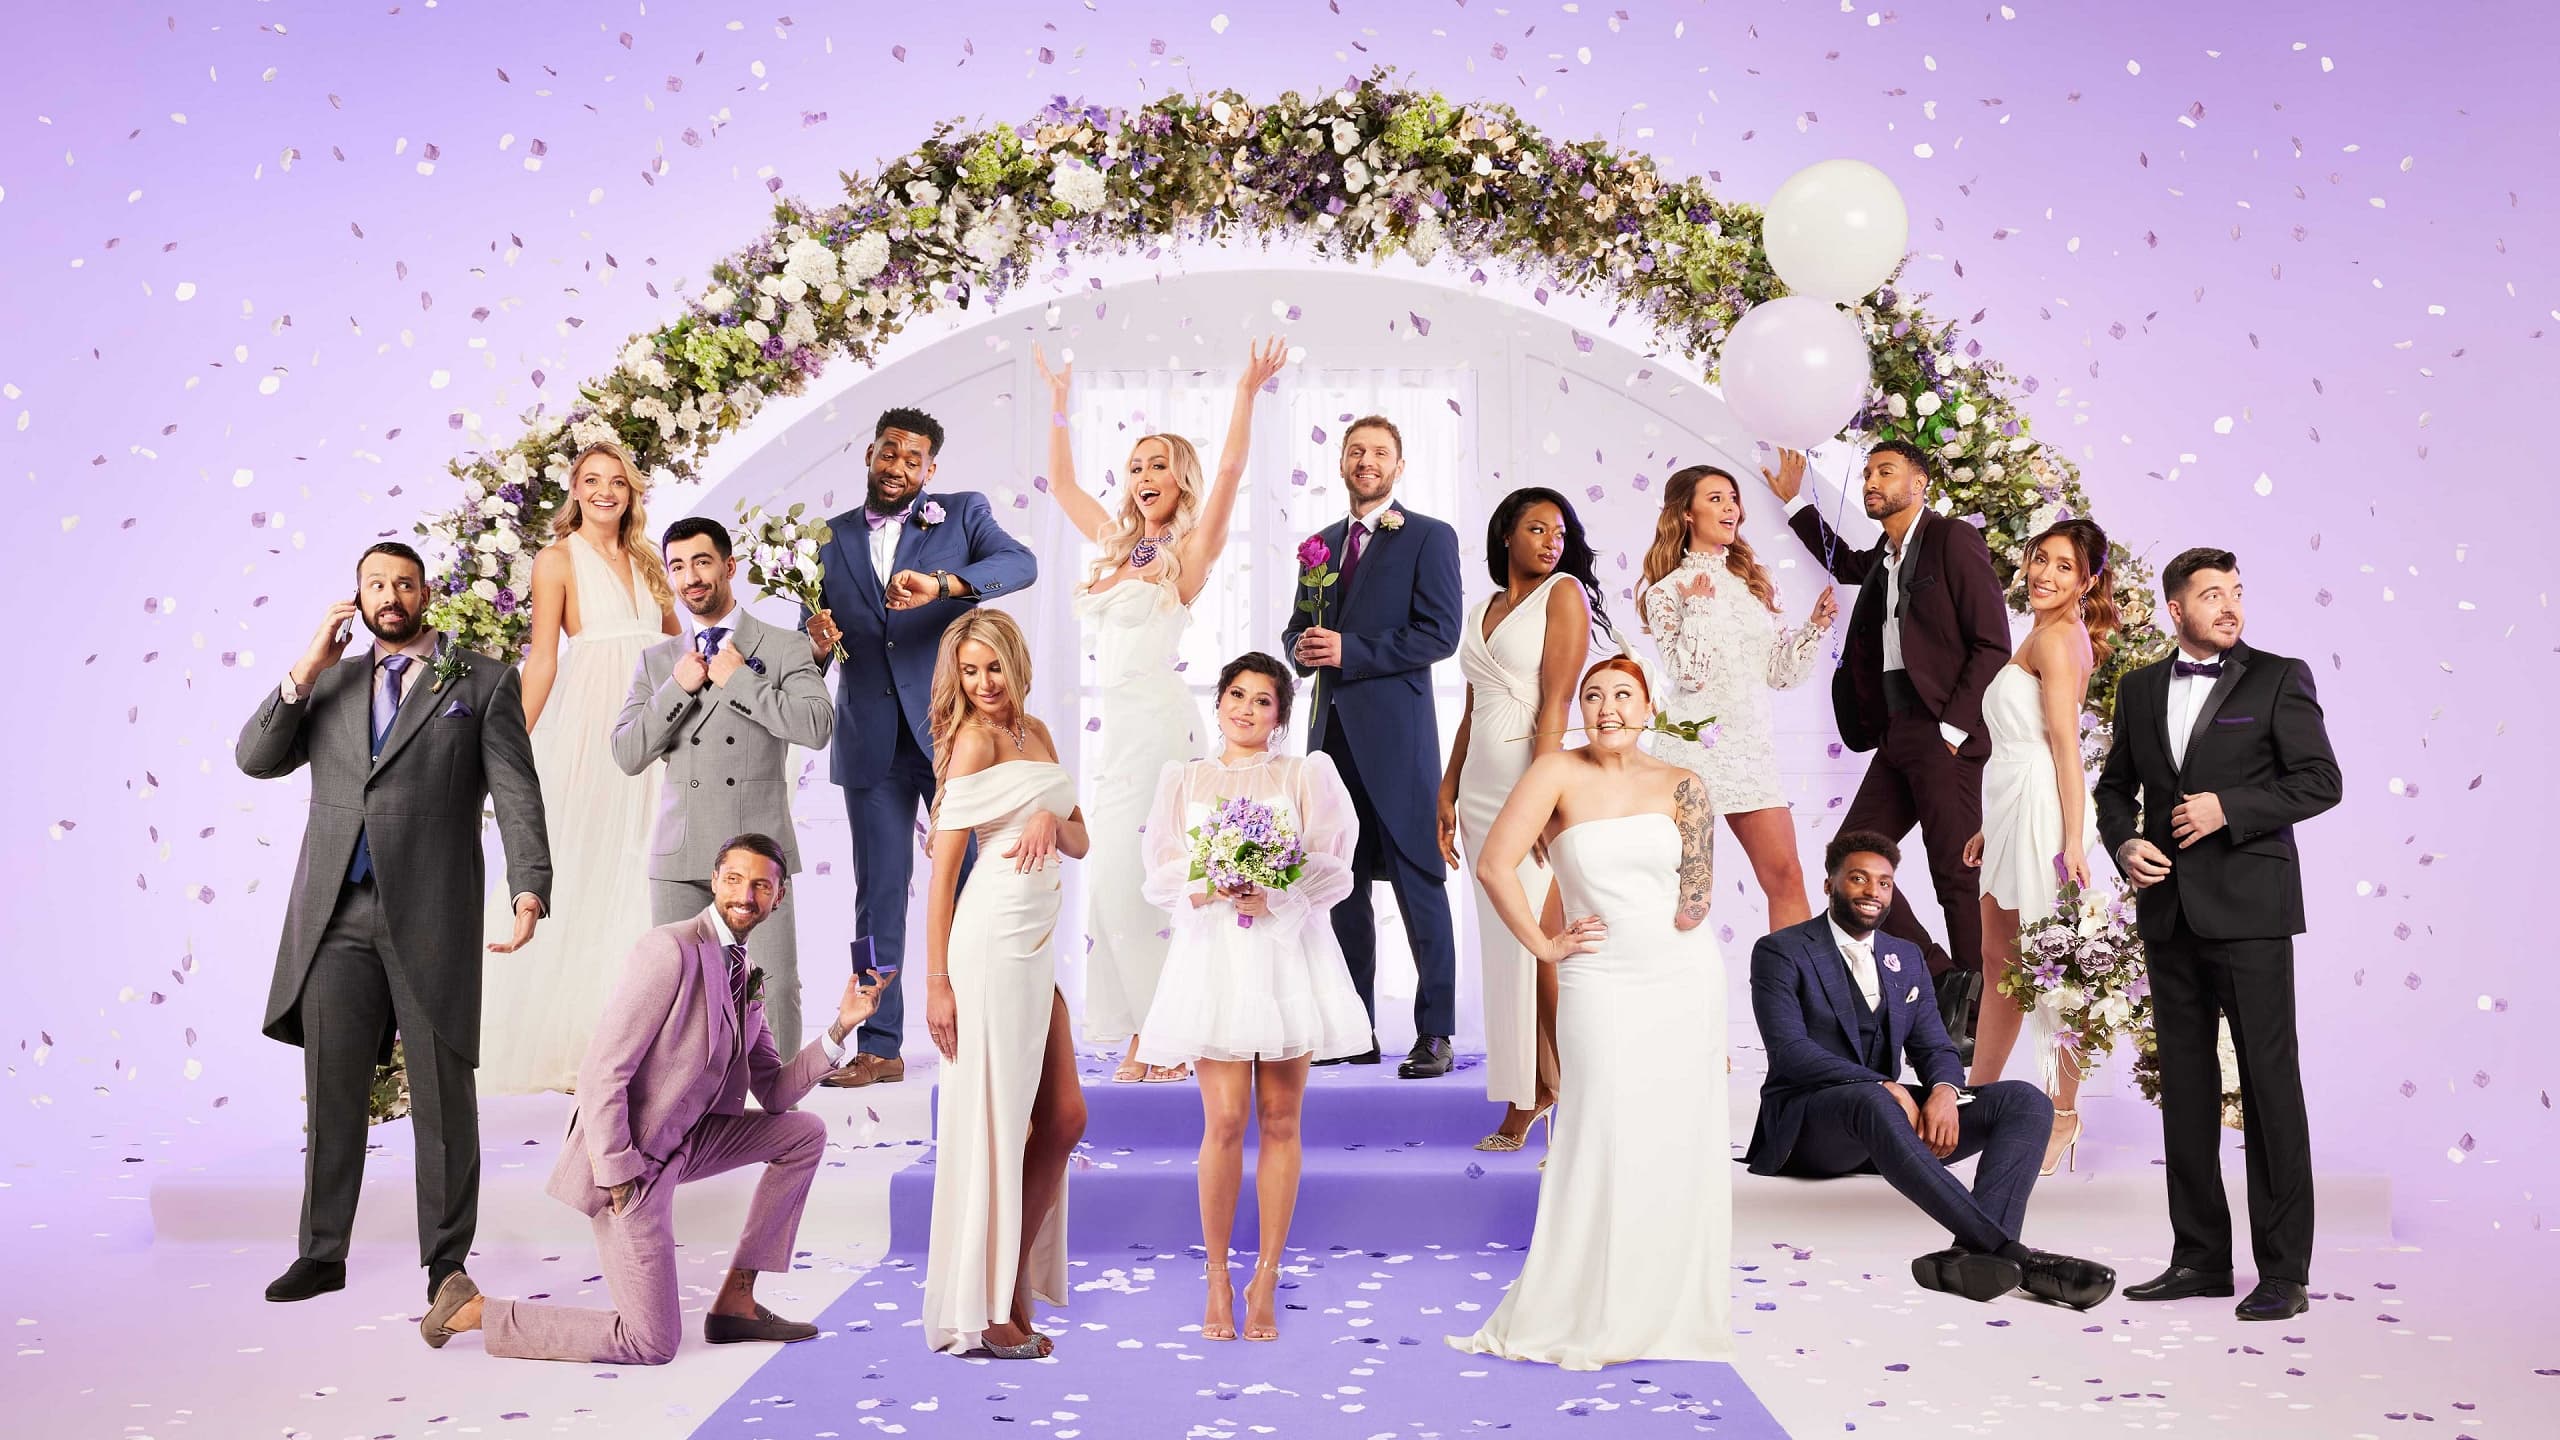 Married at First Sight UK - Season 7 Episode 25